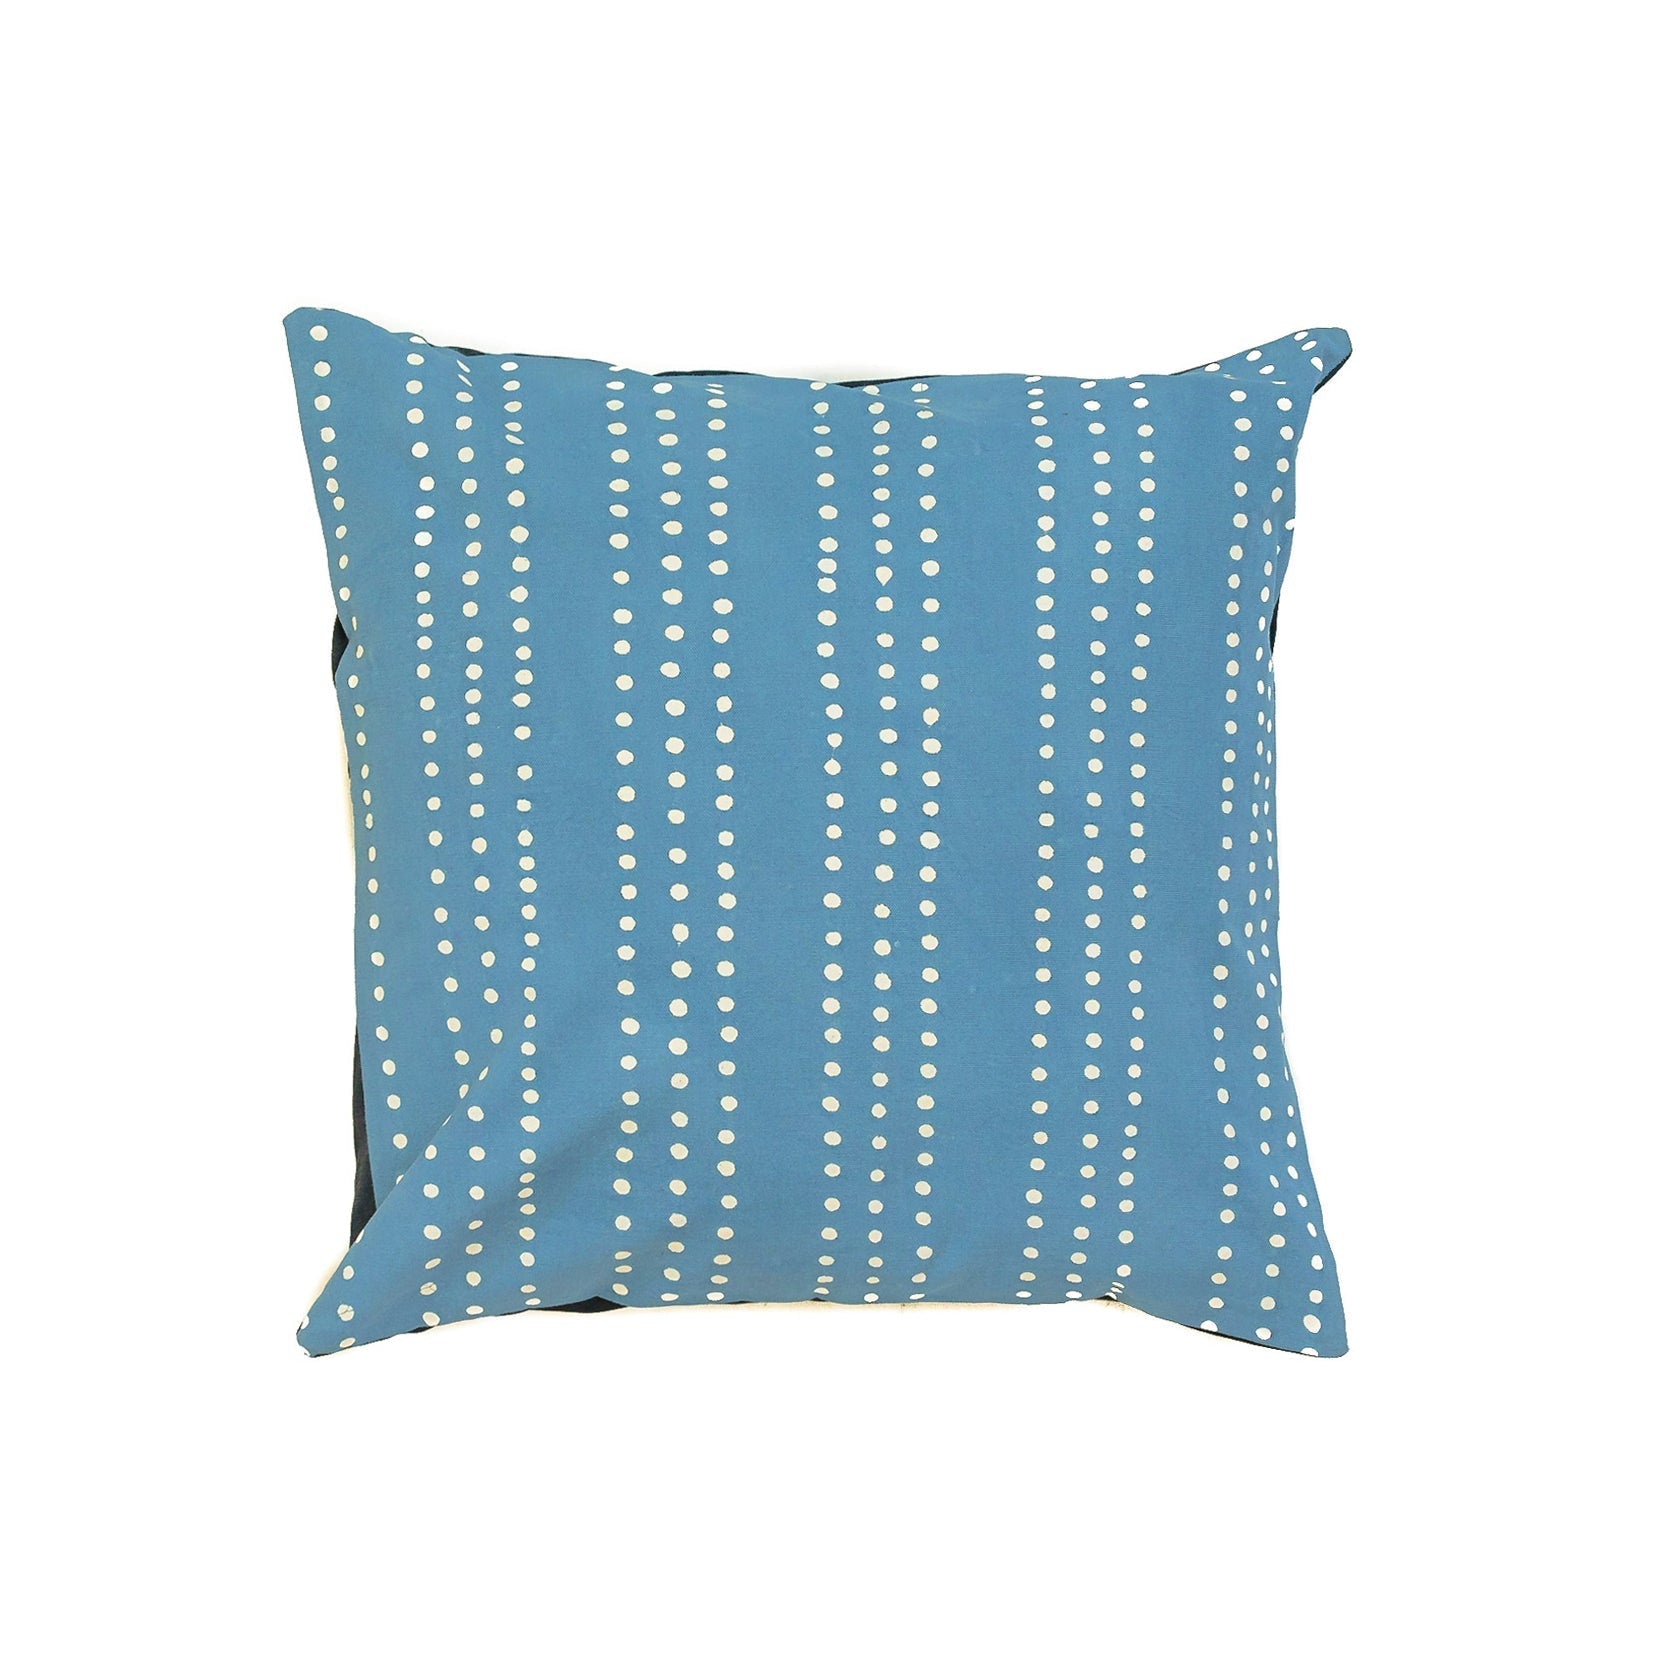 The perfect baby blue cushion cover, made from 100% cotton with a detailed small dot pattern.